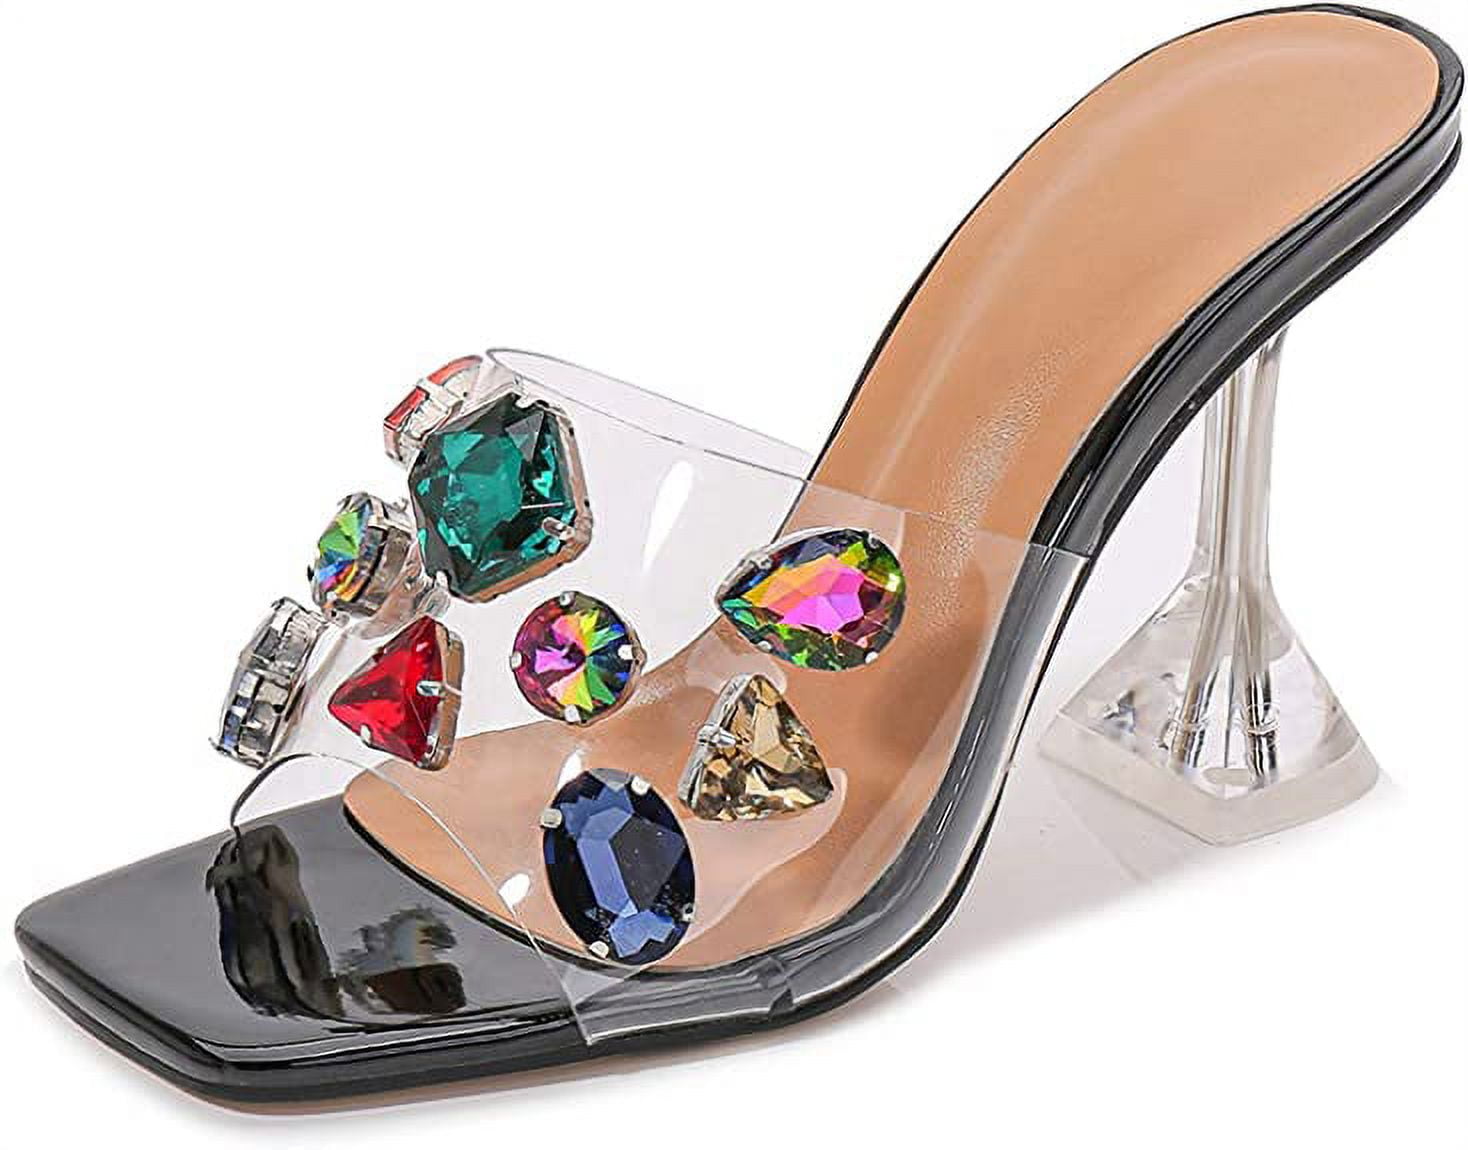 The Glass Slipper - Transparent  Shoes heels classy, Homecoming shoes,  Louis vuitton shoes heels